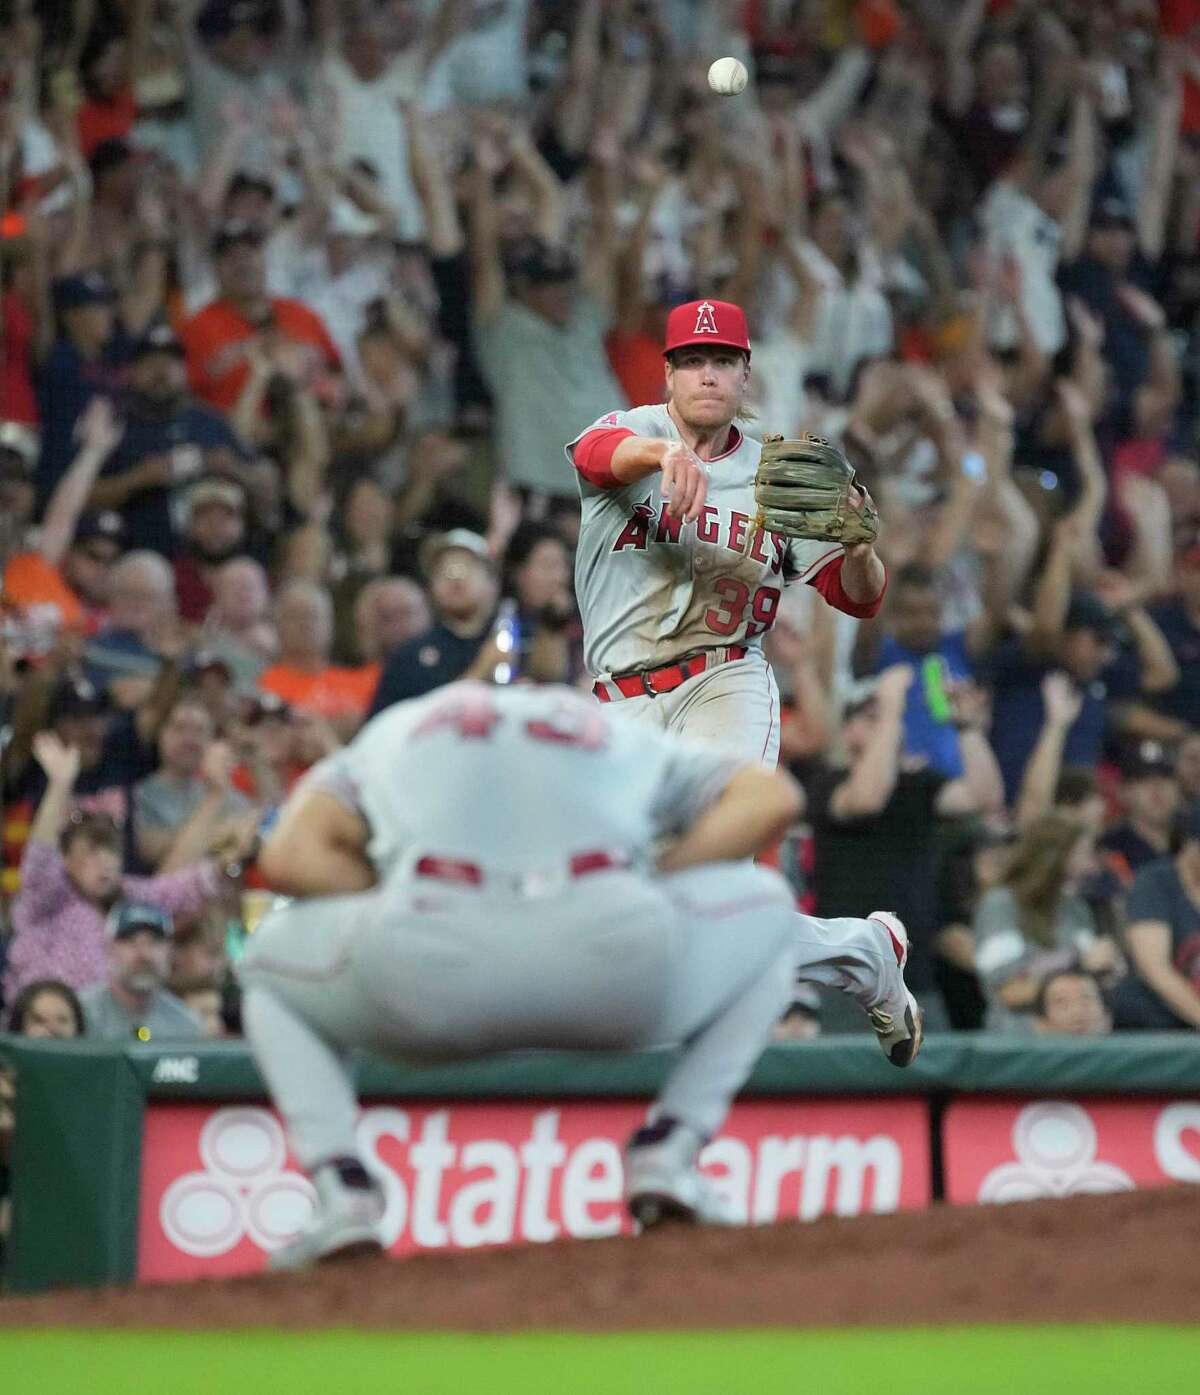 Los Angeles Angels third baseman David MacKinnon (39) tries to make the throw to first base over starting pitcher Patrick Sandoval as Houston Astros Jeremy Peña singled during the fourth inning of an MLB game at Minute Maid Park on Saturday, July 2, 2022 in Houston.